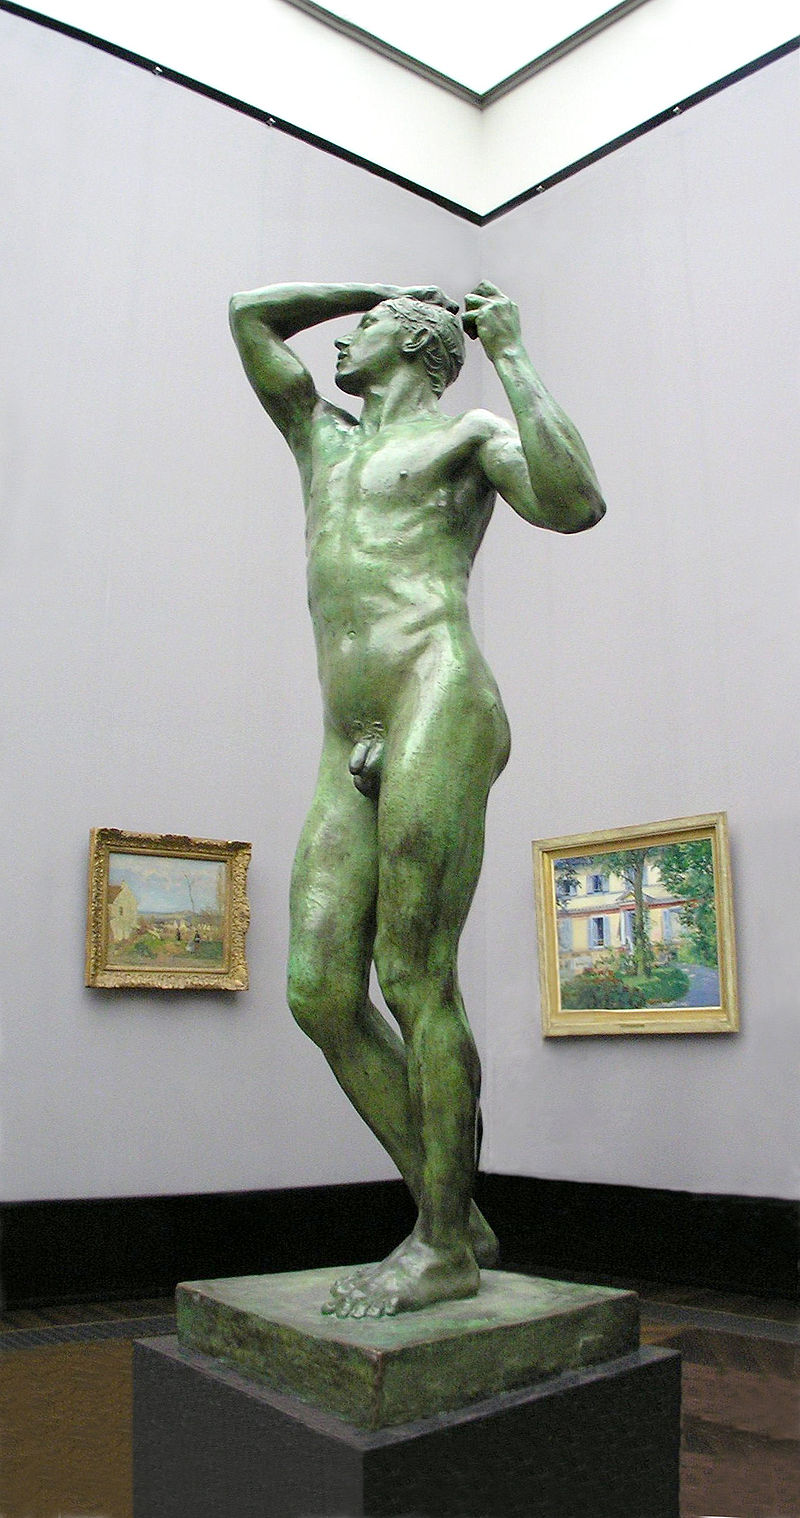 Auguste Rodin, The Age of Bronze, 1875/76, Alte Nationalgalerie, Berlin, Germany.